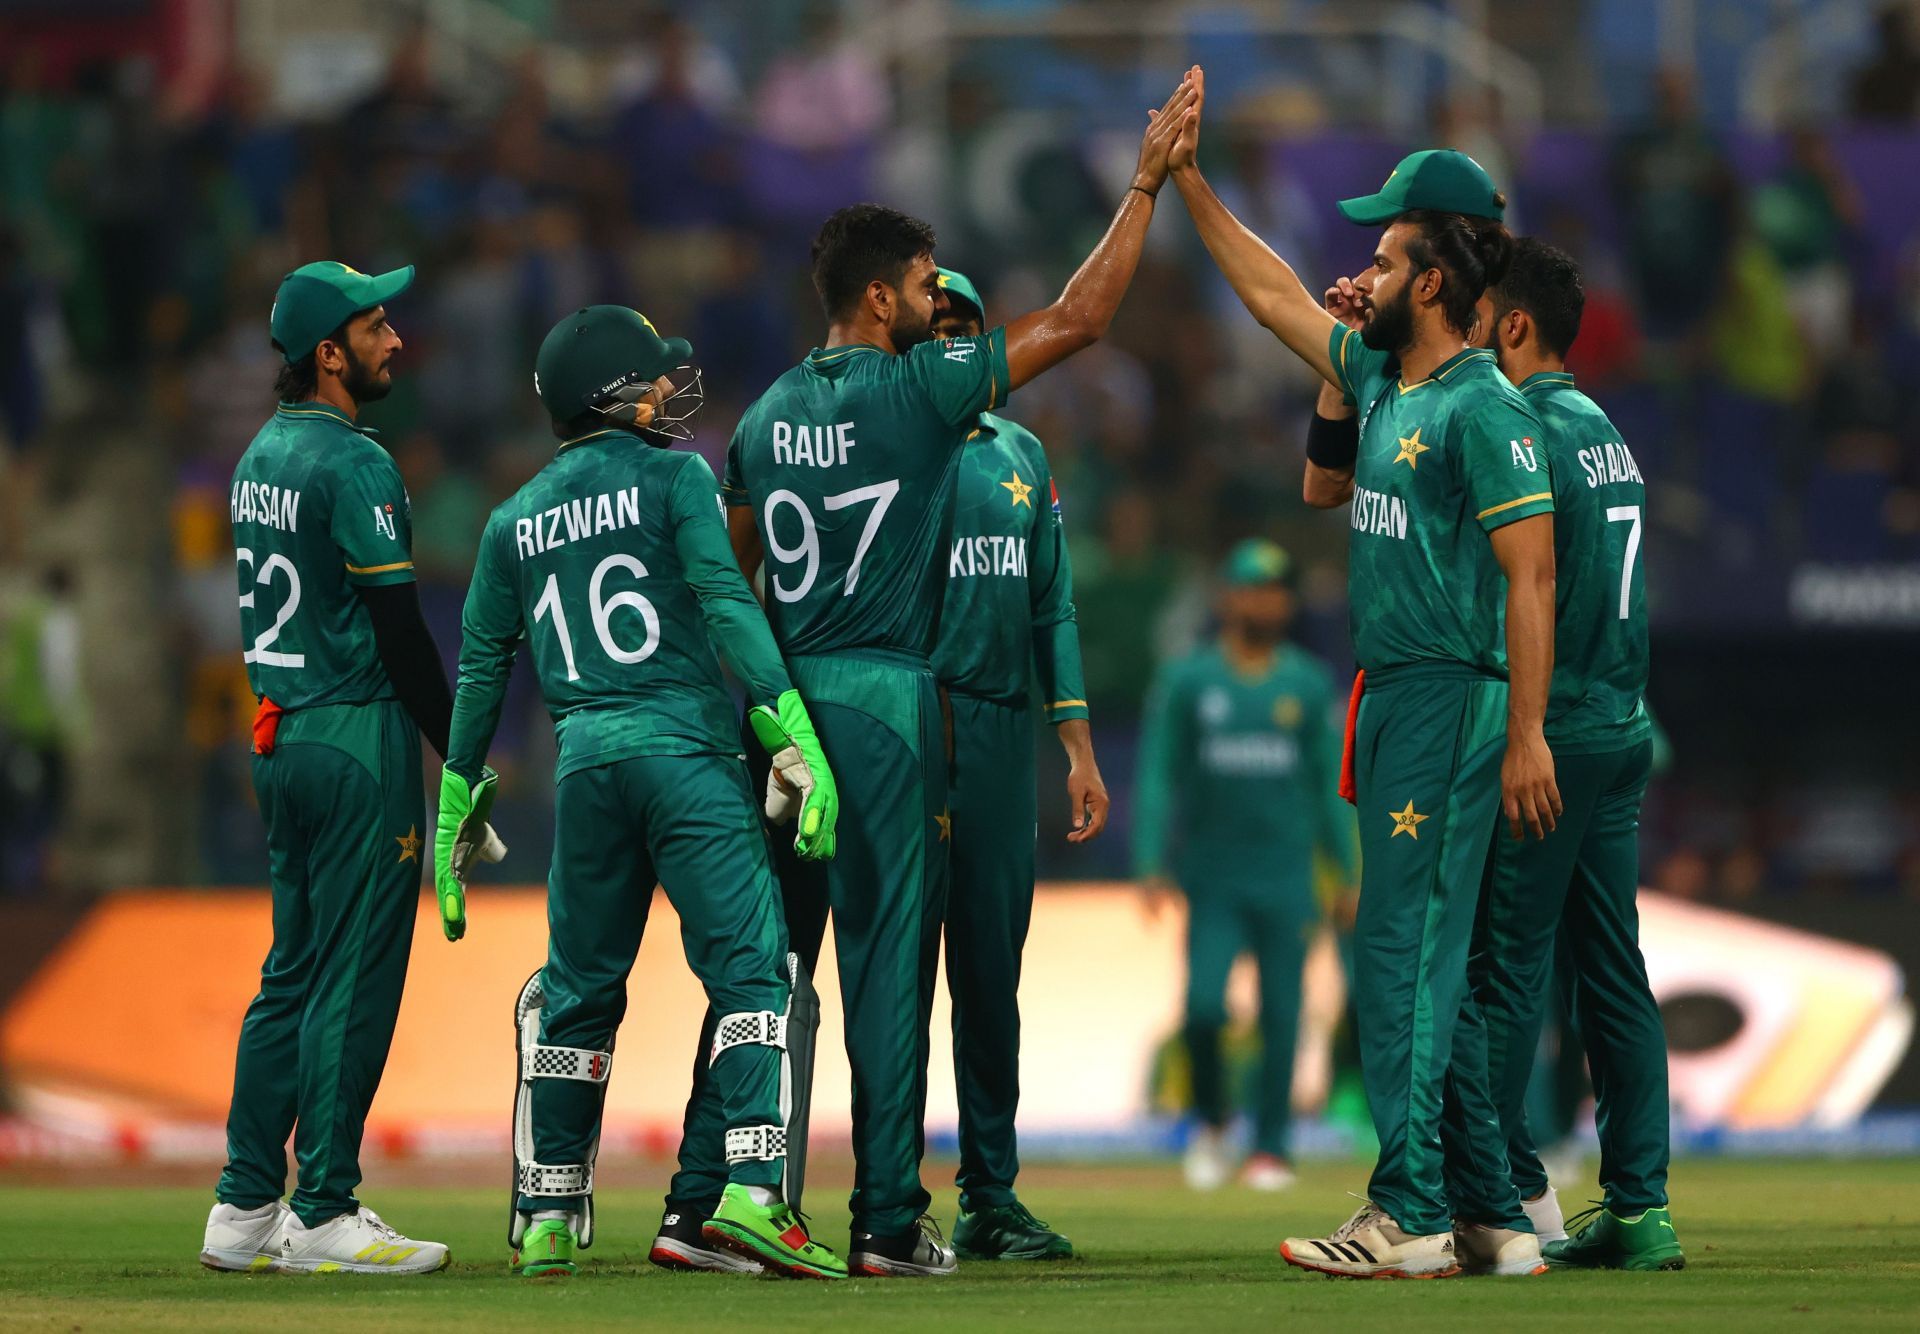 Pakistan has been sensation in the T20 World Cup so far